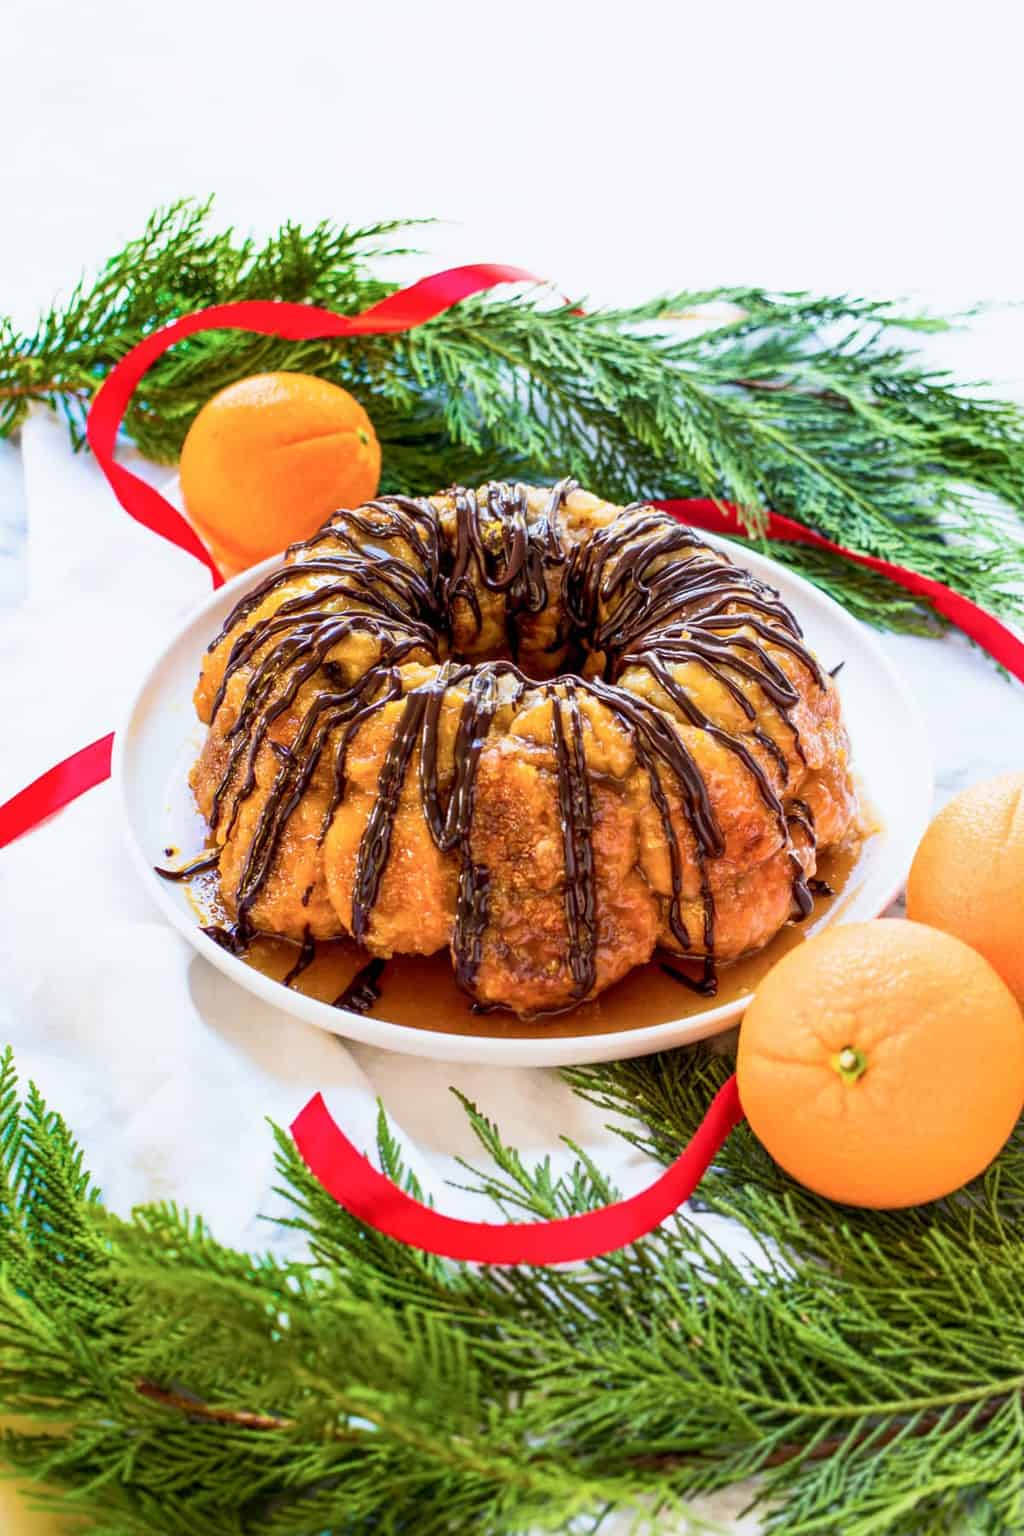 Perfect holiday recipe! an easy monkey bread recipe with chocolate and orange flavors (or whatever floats your boat!) for the holidays! by top Houston lifestyle blogger Ashley Rose of Sugar & Cloth - #recipe #easy #christmas #holidays #quickrecipes #easyrecipe #holiday #winter